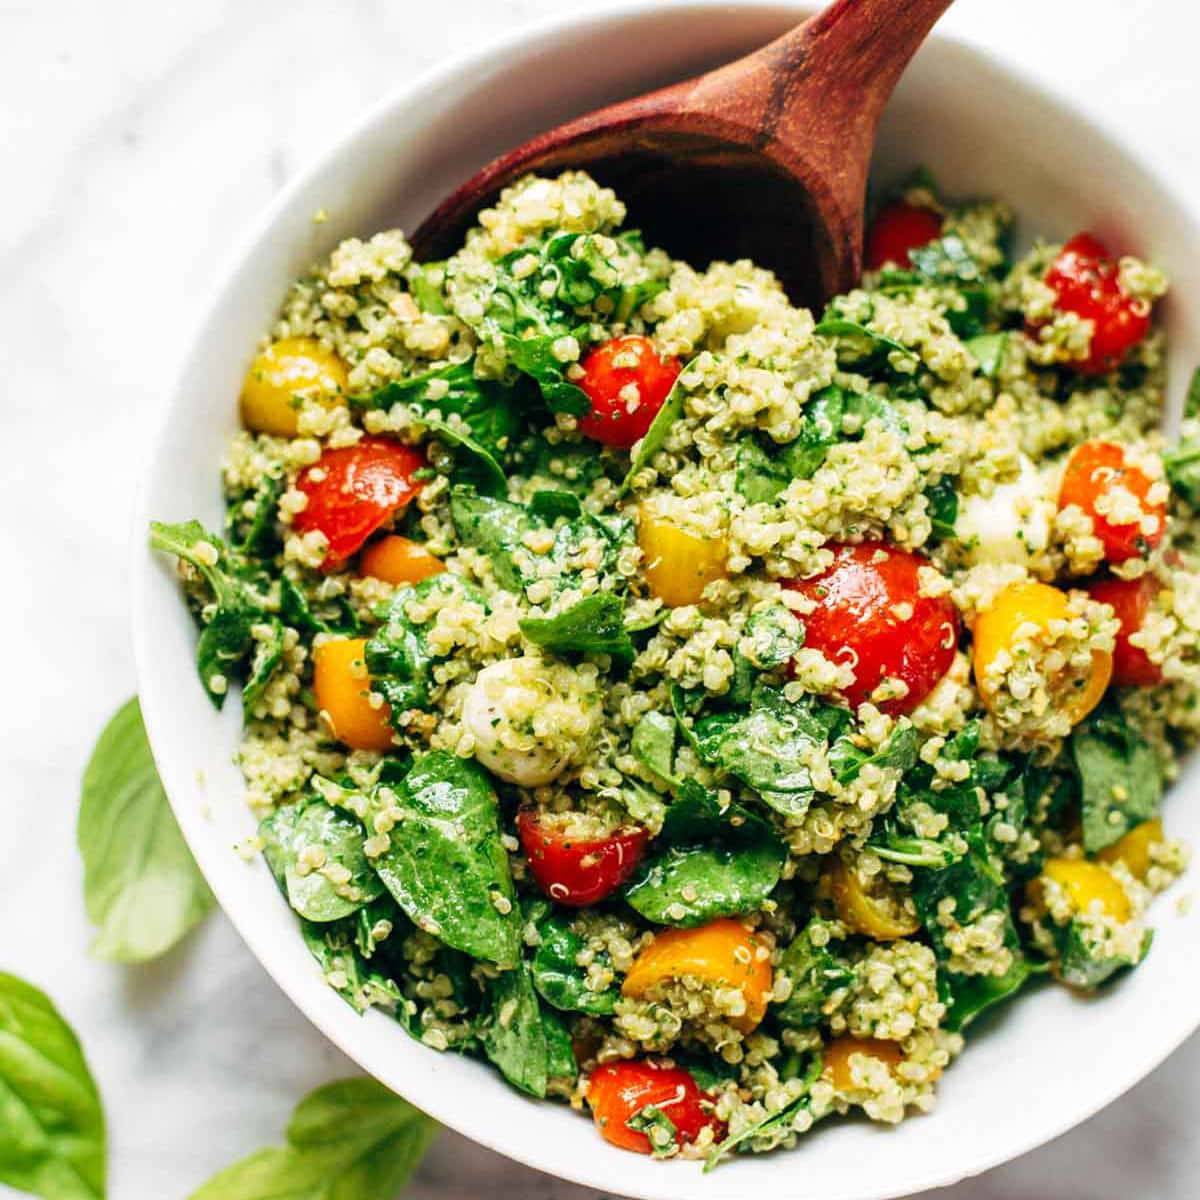 Quinoa and baby spinach tossed with green goddess sauce in a bowl with a wooden spoon.